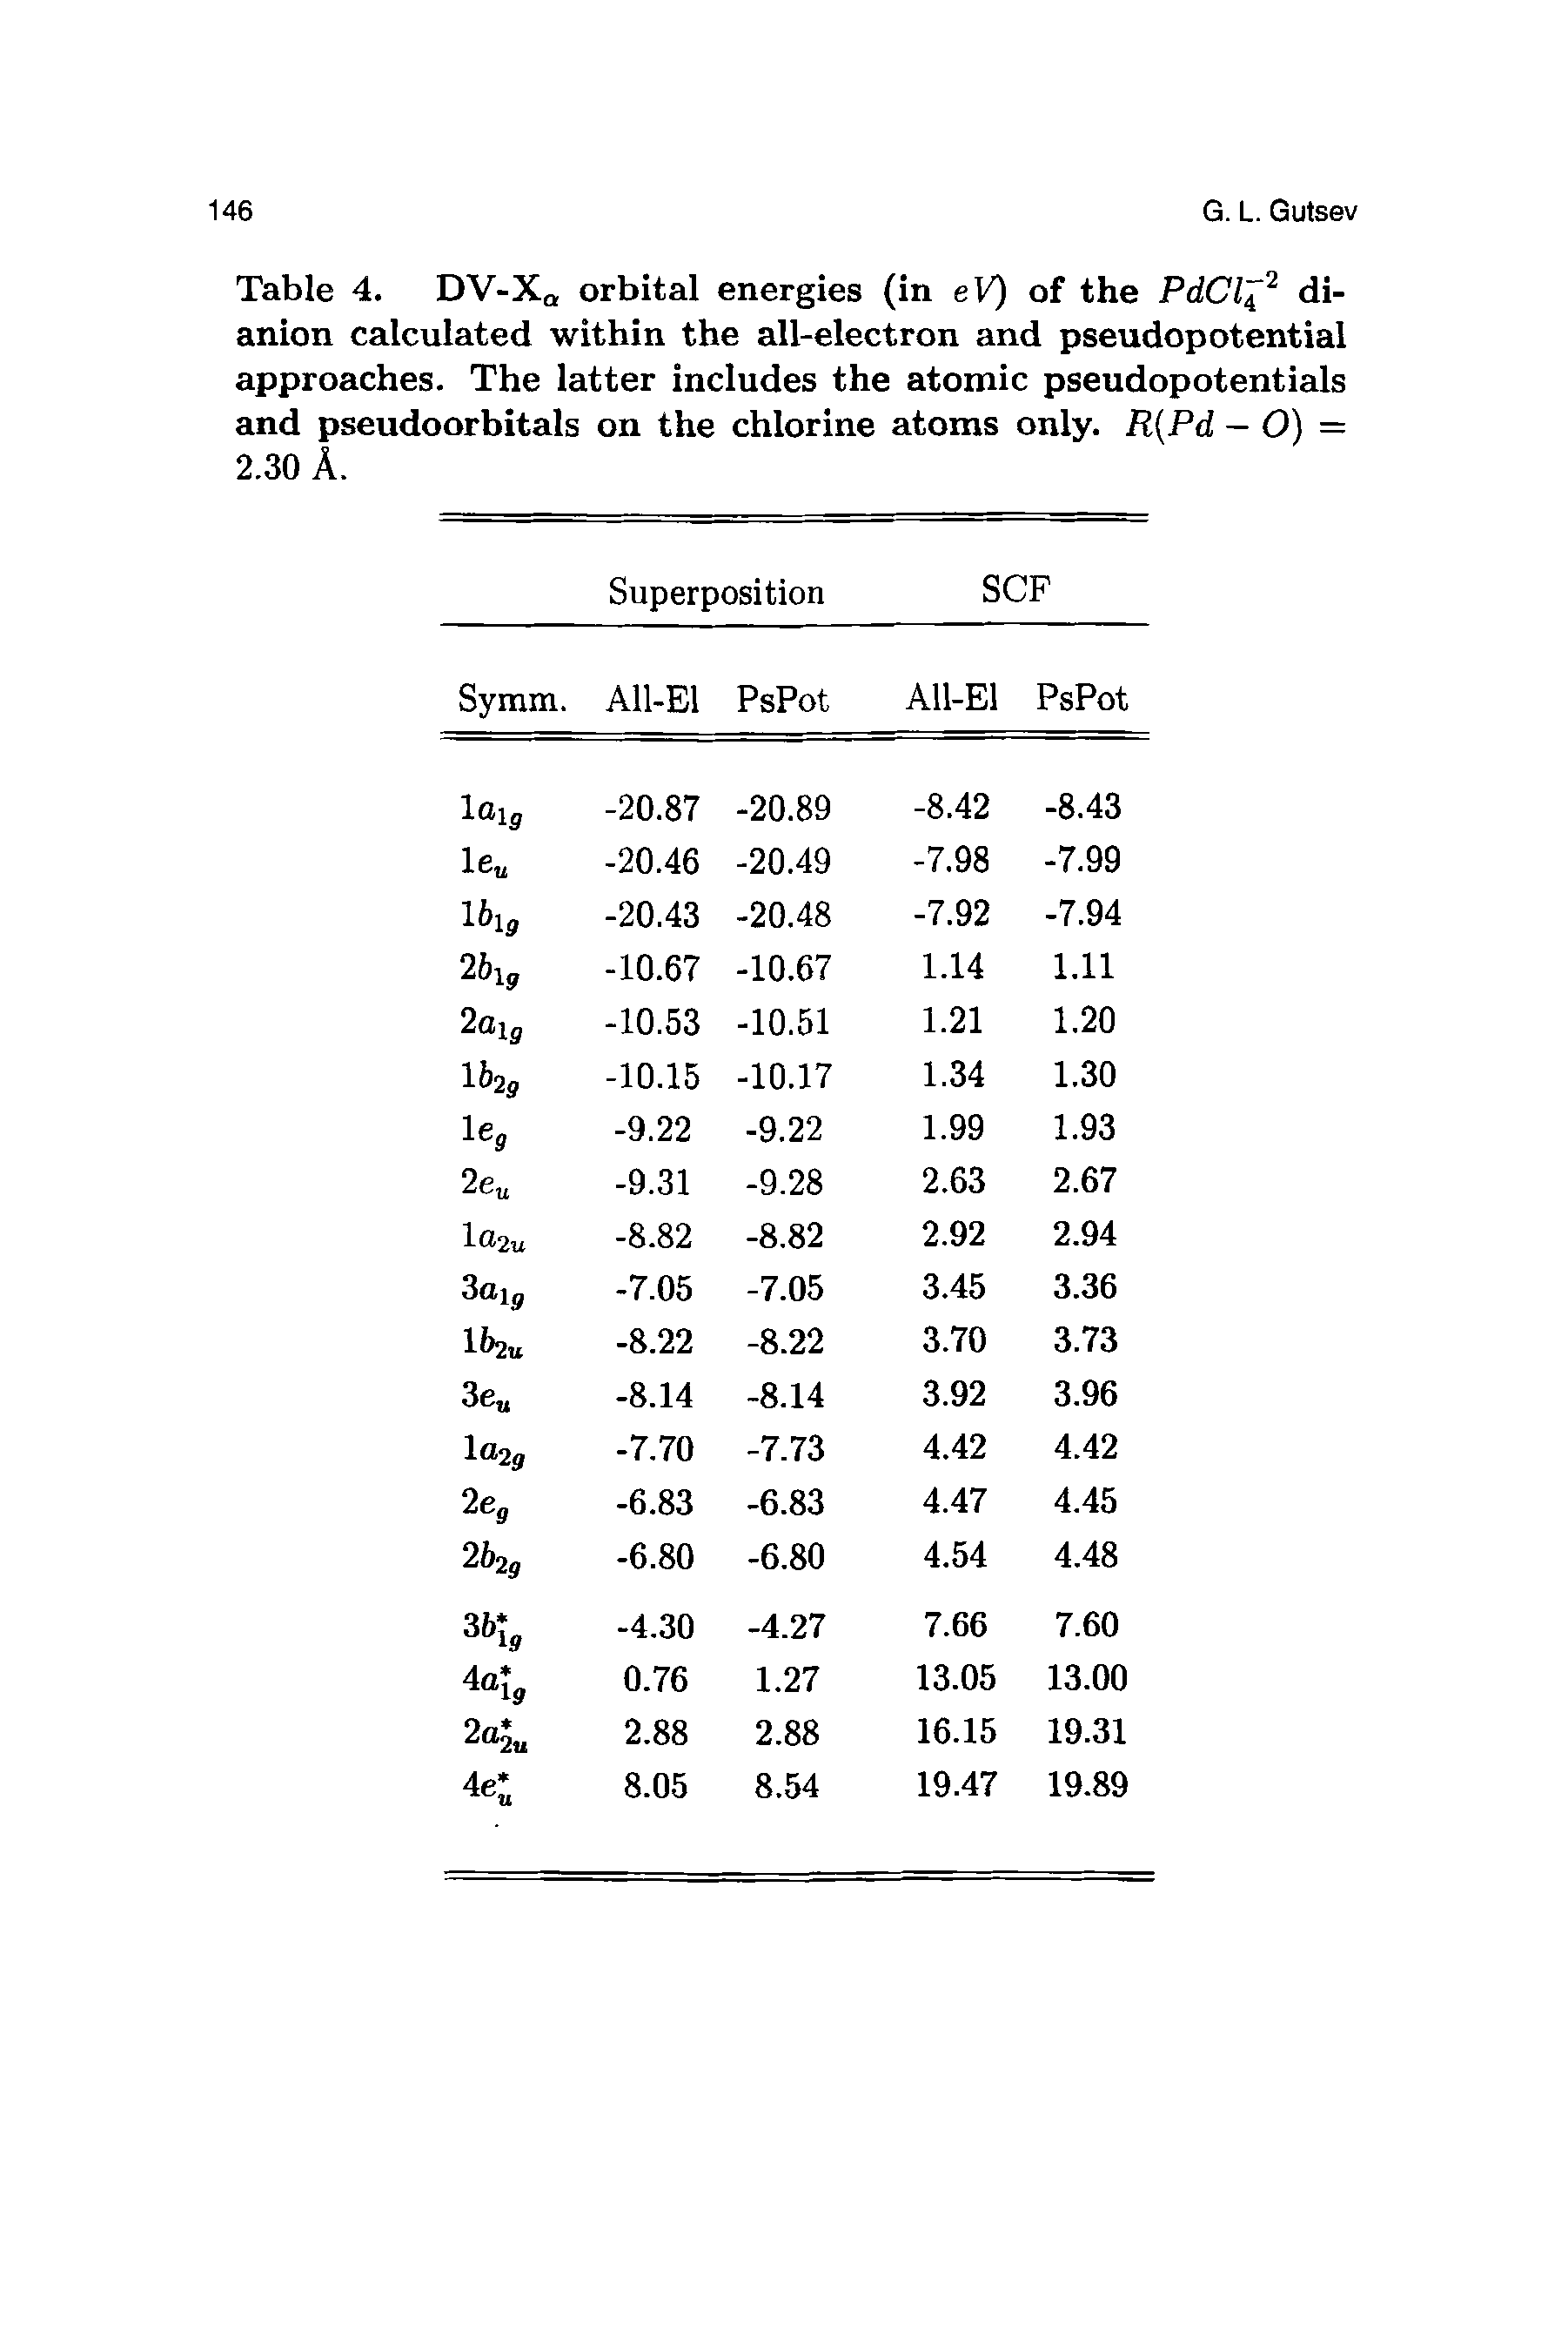 Table 4. DV-X orbital energies (in eV) of the PdCl dianion calculated within the all-electron and pseudopotential approaches. The latter includes the atomic pseudopotentials and pseudoorbitals on the chlorine atoms only. R Pd — O) = 2.30 A.